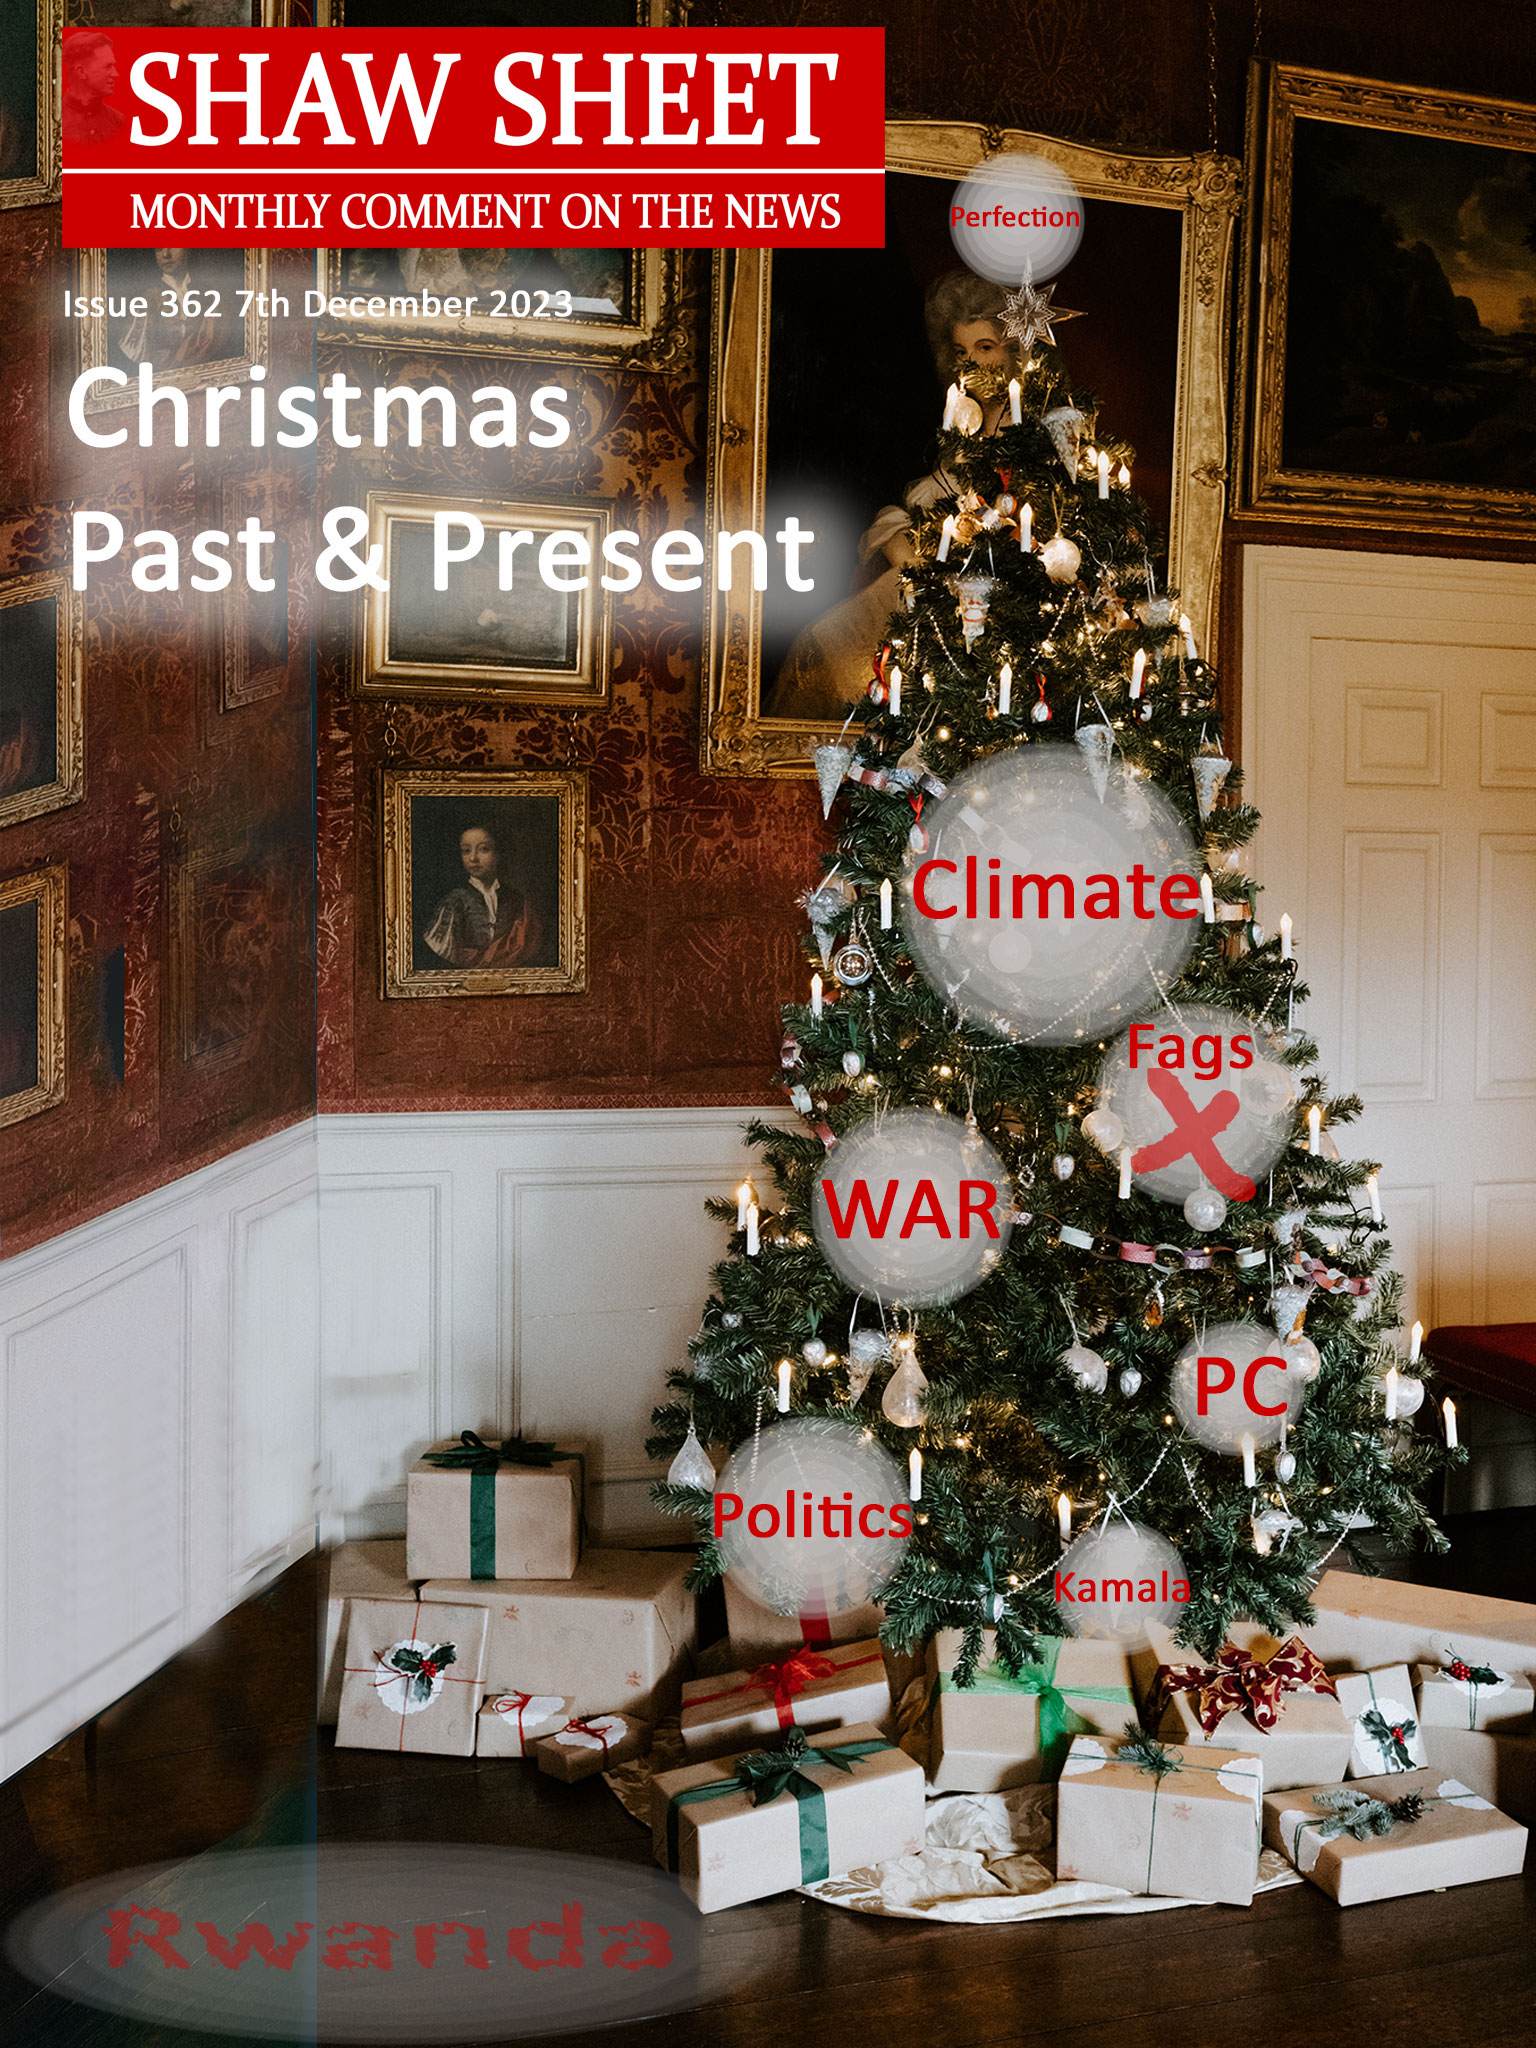 An image of a Christmas tree in a room hung with paintings. Baubles say WAR, PC, Climate, Kamala, Fags with a large X, and Perfection as the 'fairy.